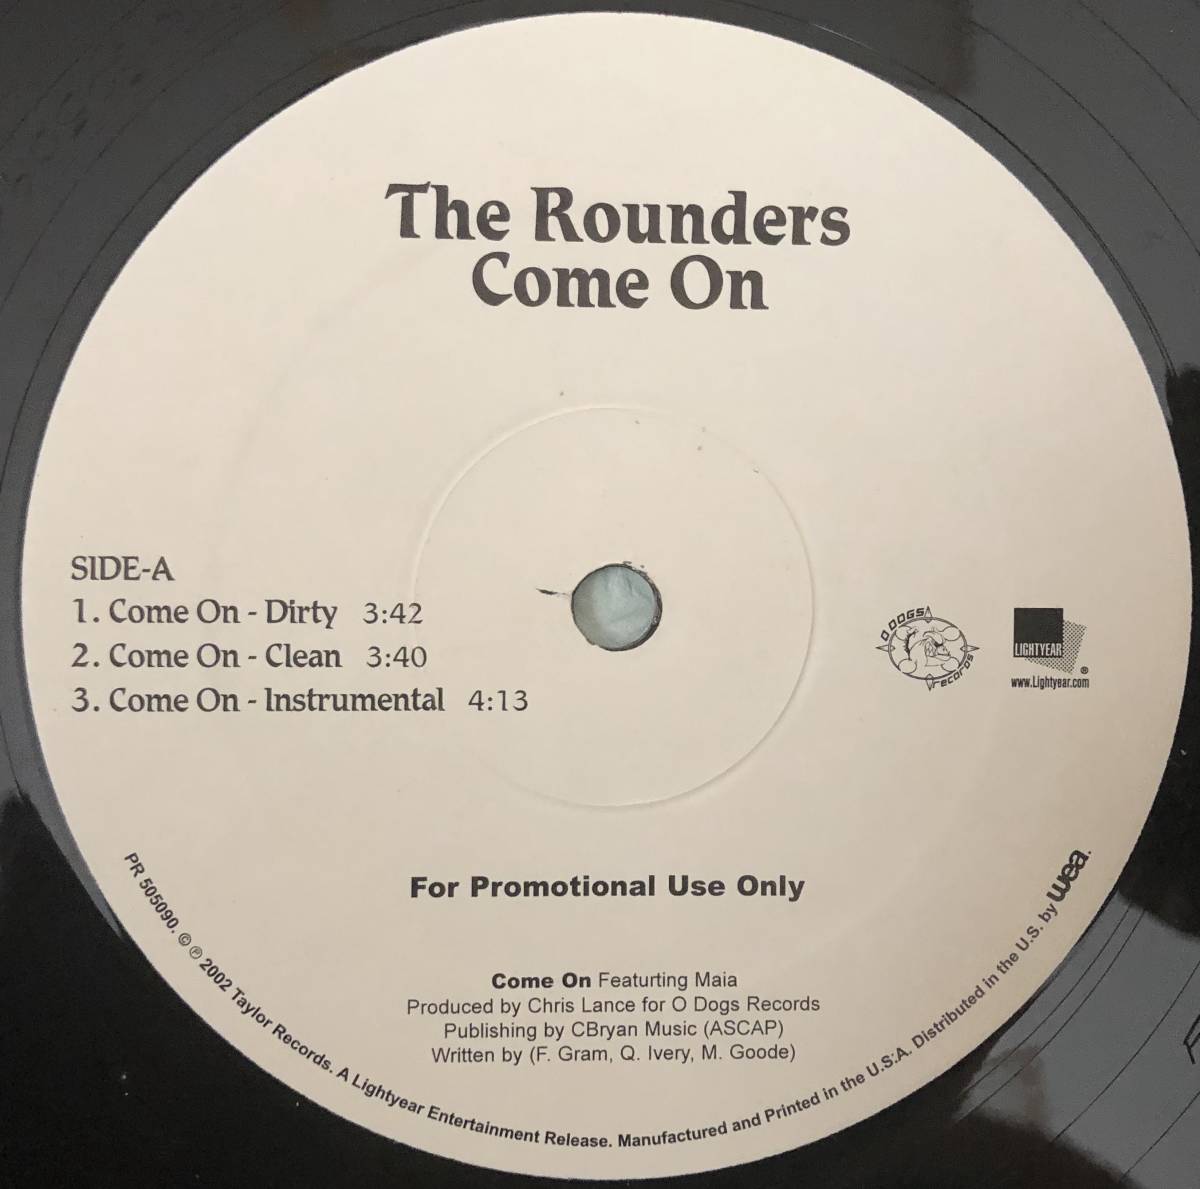 US PROMO ONLY レア盤 / THE ROUNDERS / COME ON / ROUNDERS ANTHEM / 2002 HIPHOP CLUB HIT_画像1